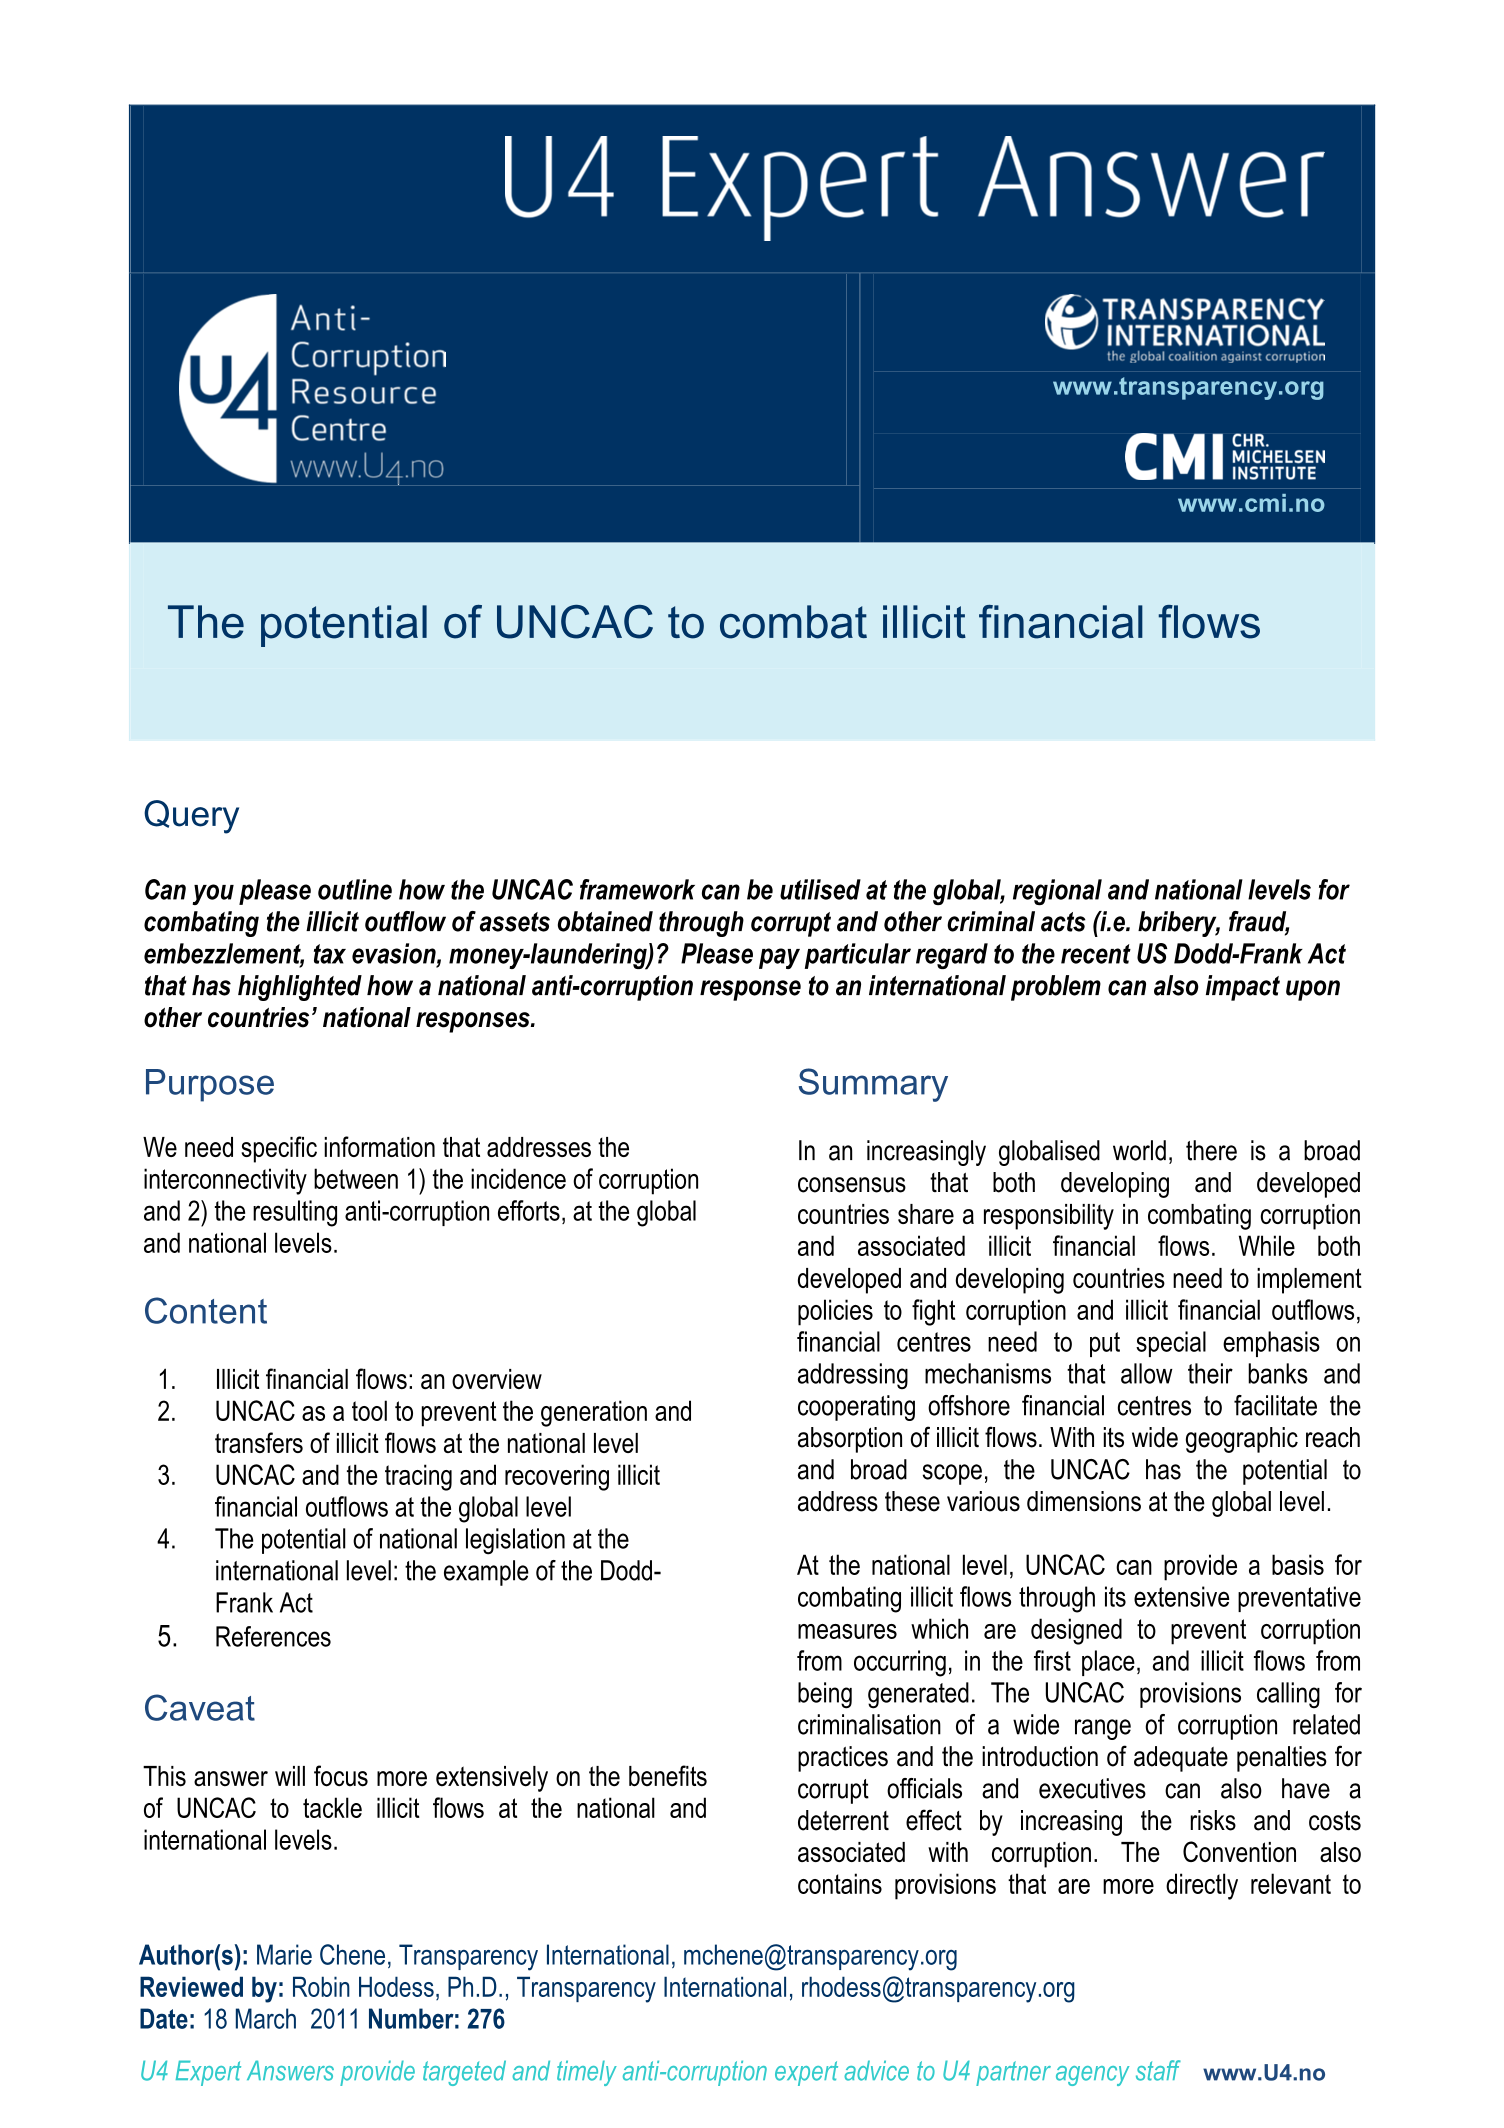 The potential of UNCAC to combat illicit financial flows